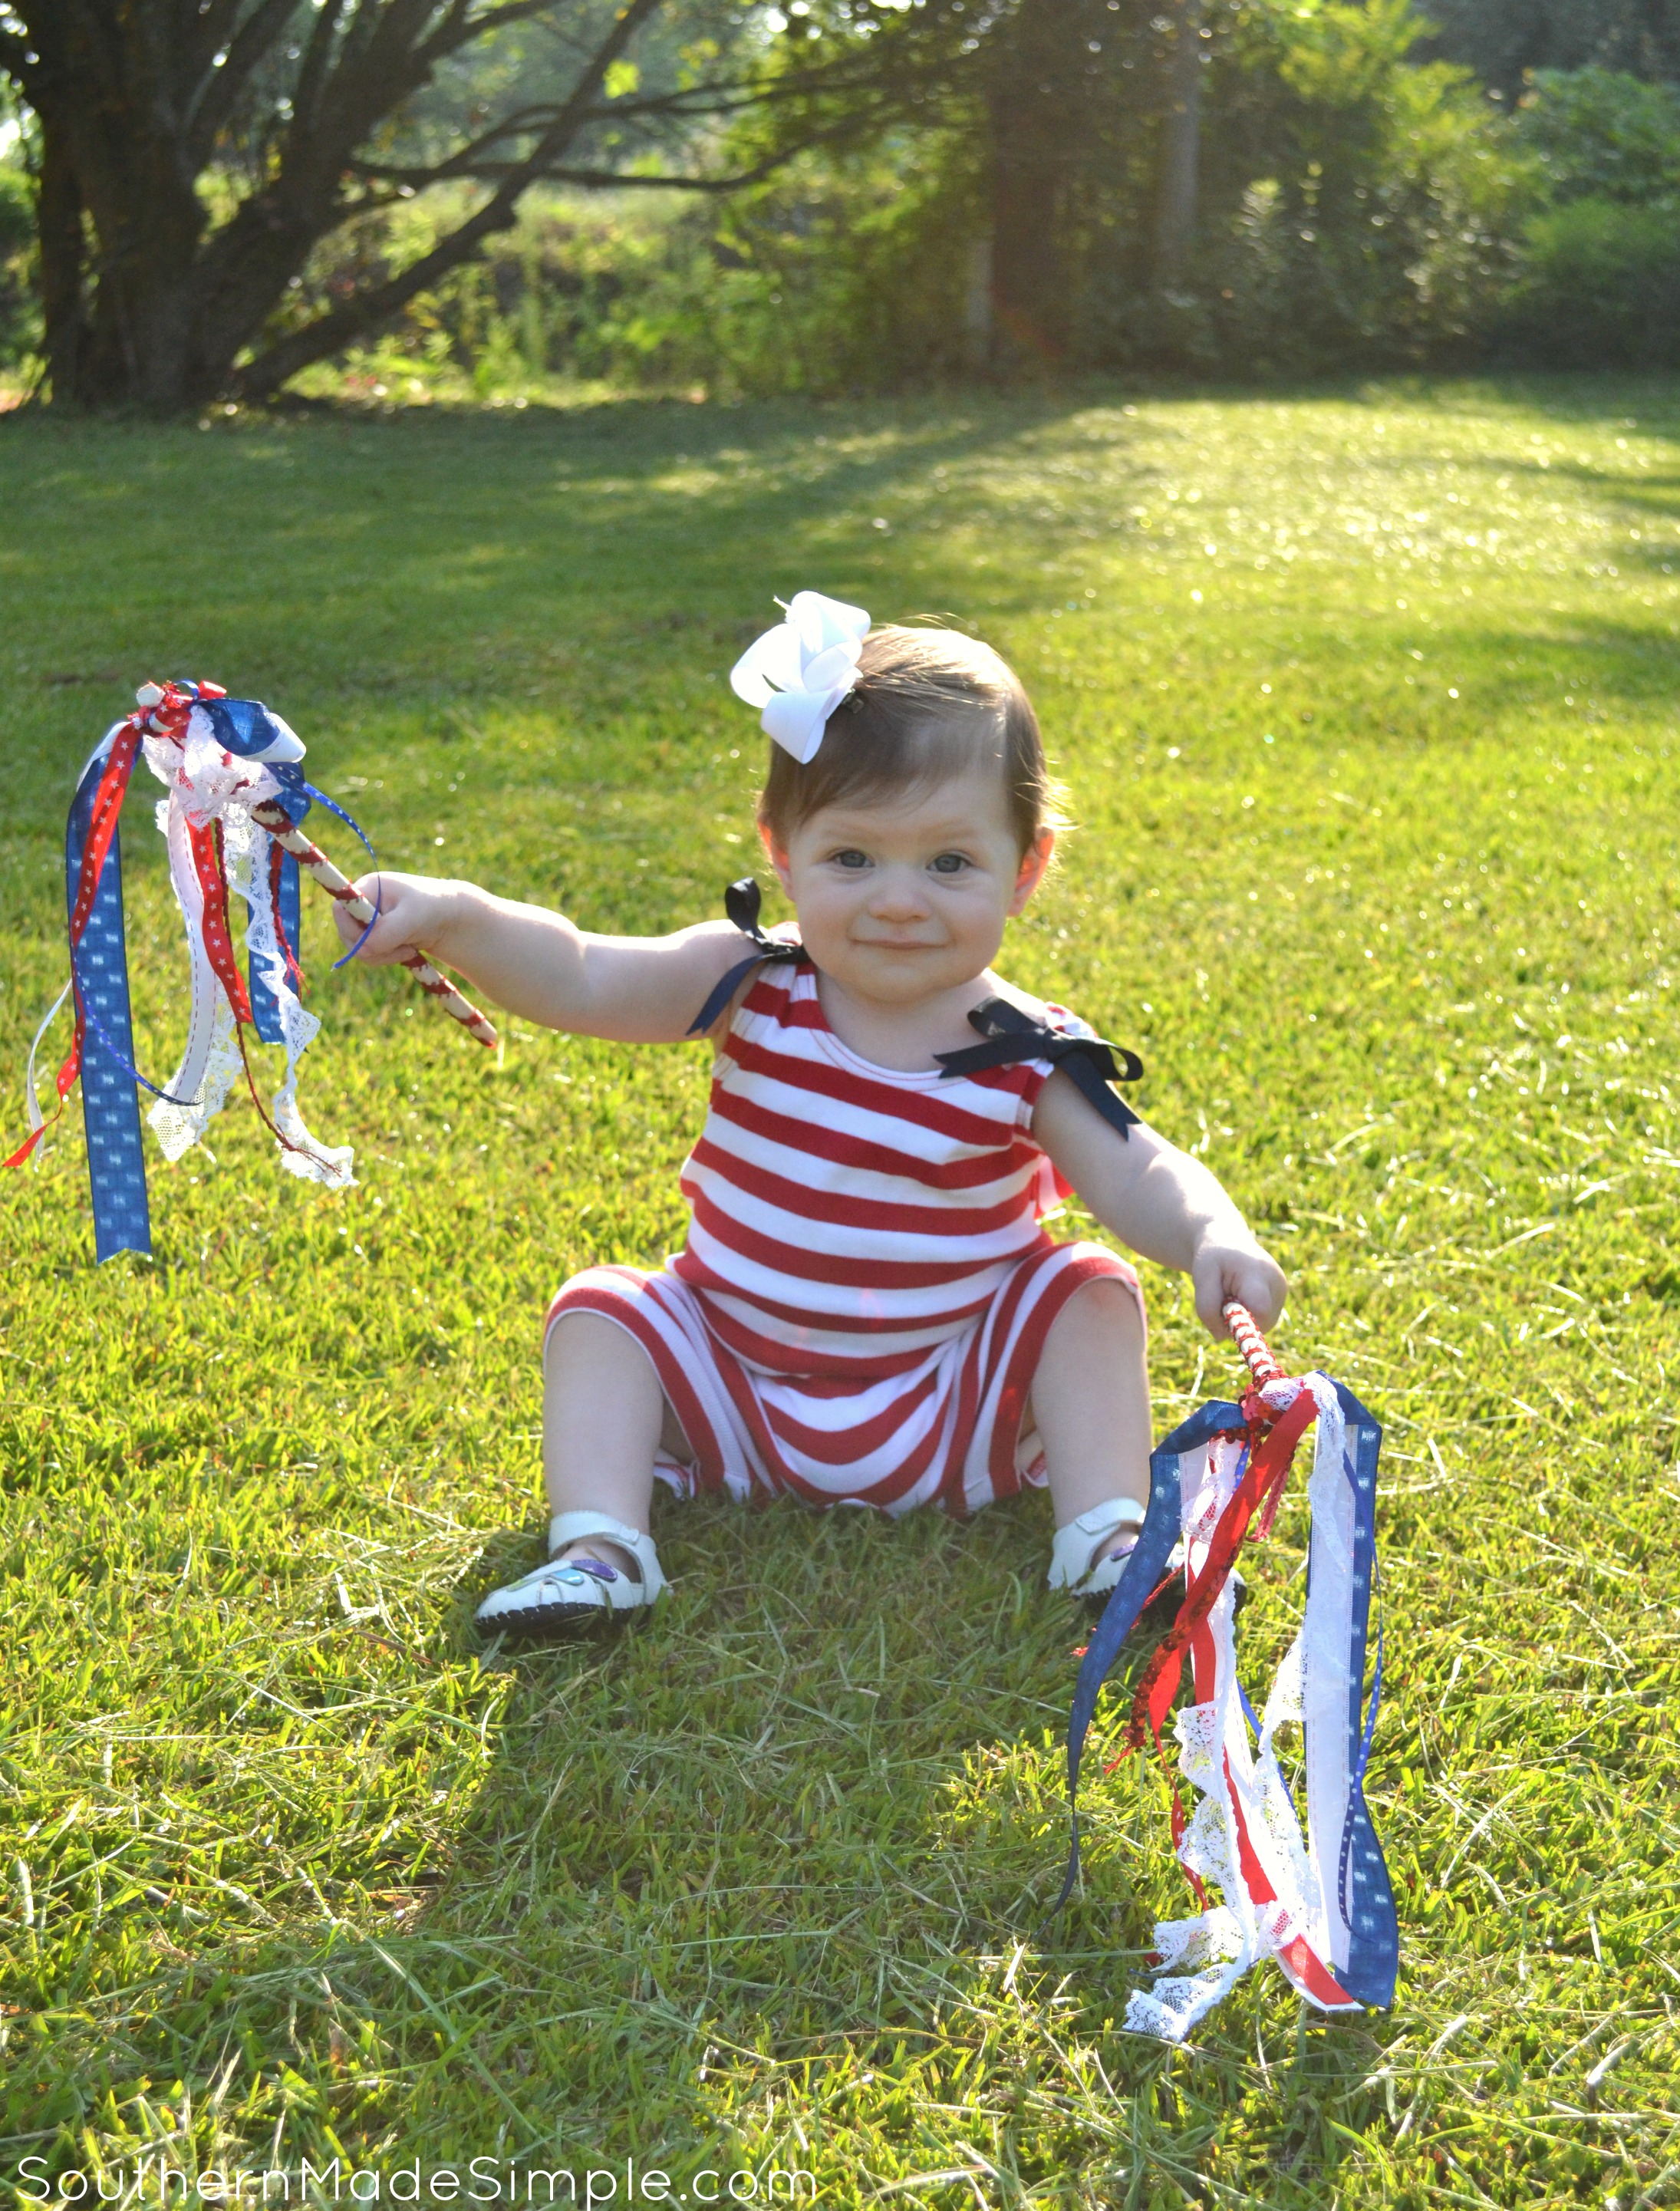 4th of July Craft: DIY Ribbon Wand - the perfect alternative to sparklers!